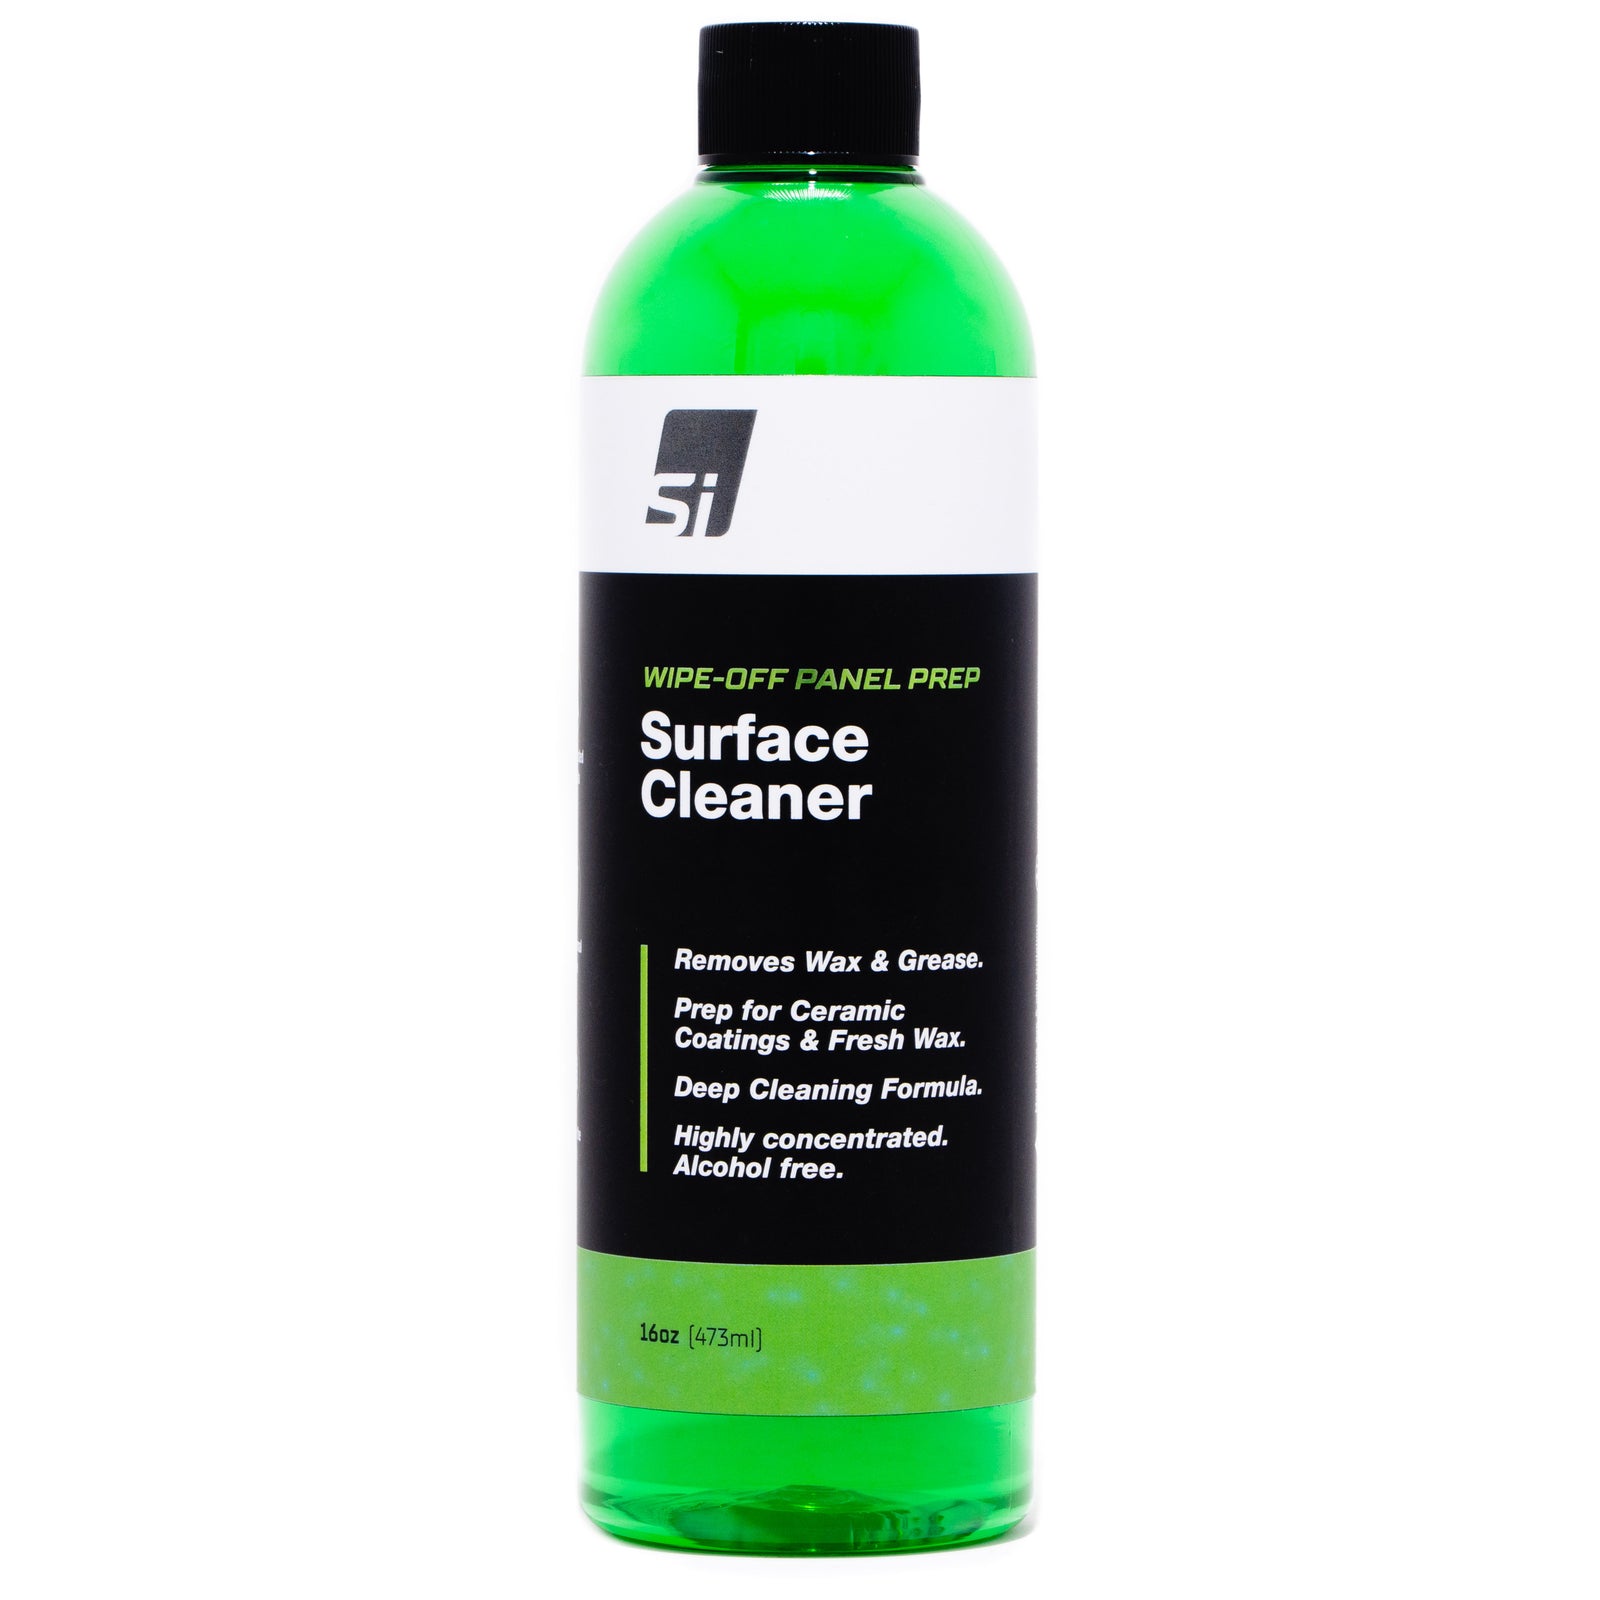 Wipe-Off Panel Prep Surface Cleaner